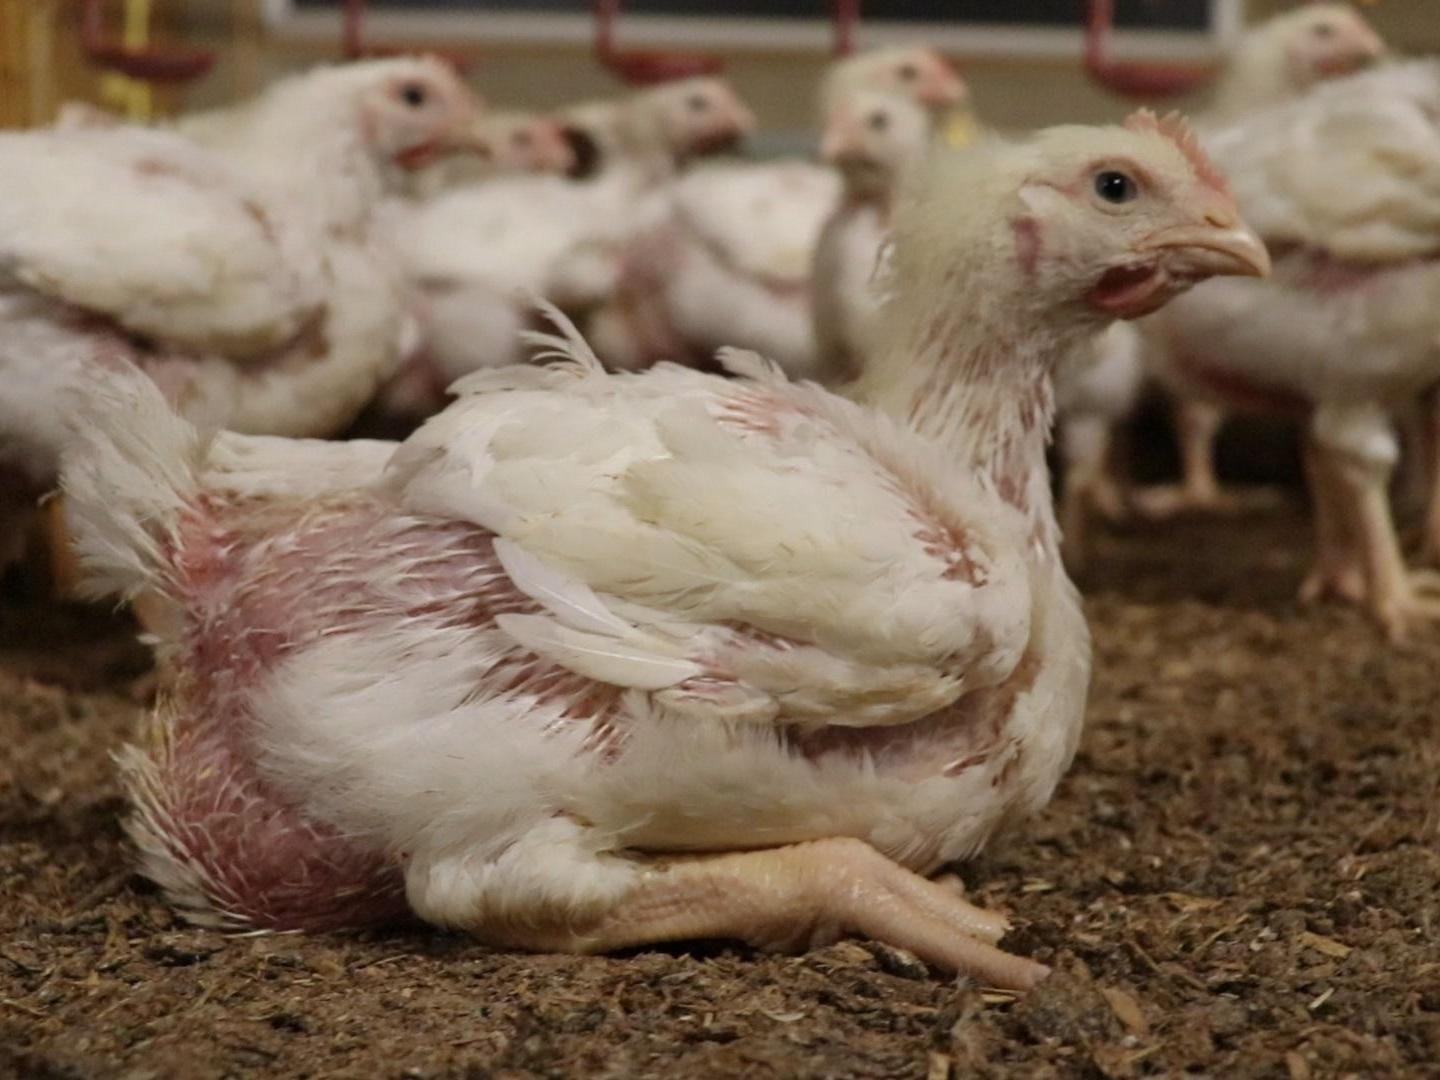 Suffering of chickens at farms supplying major supermarkets revealed in undercover footage